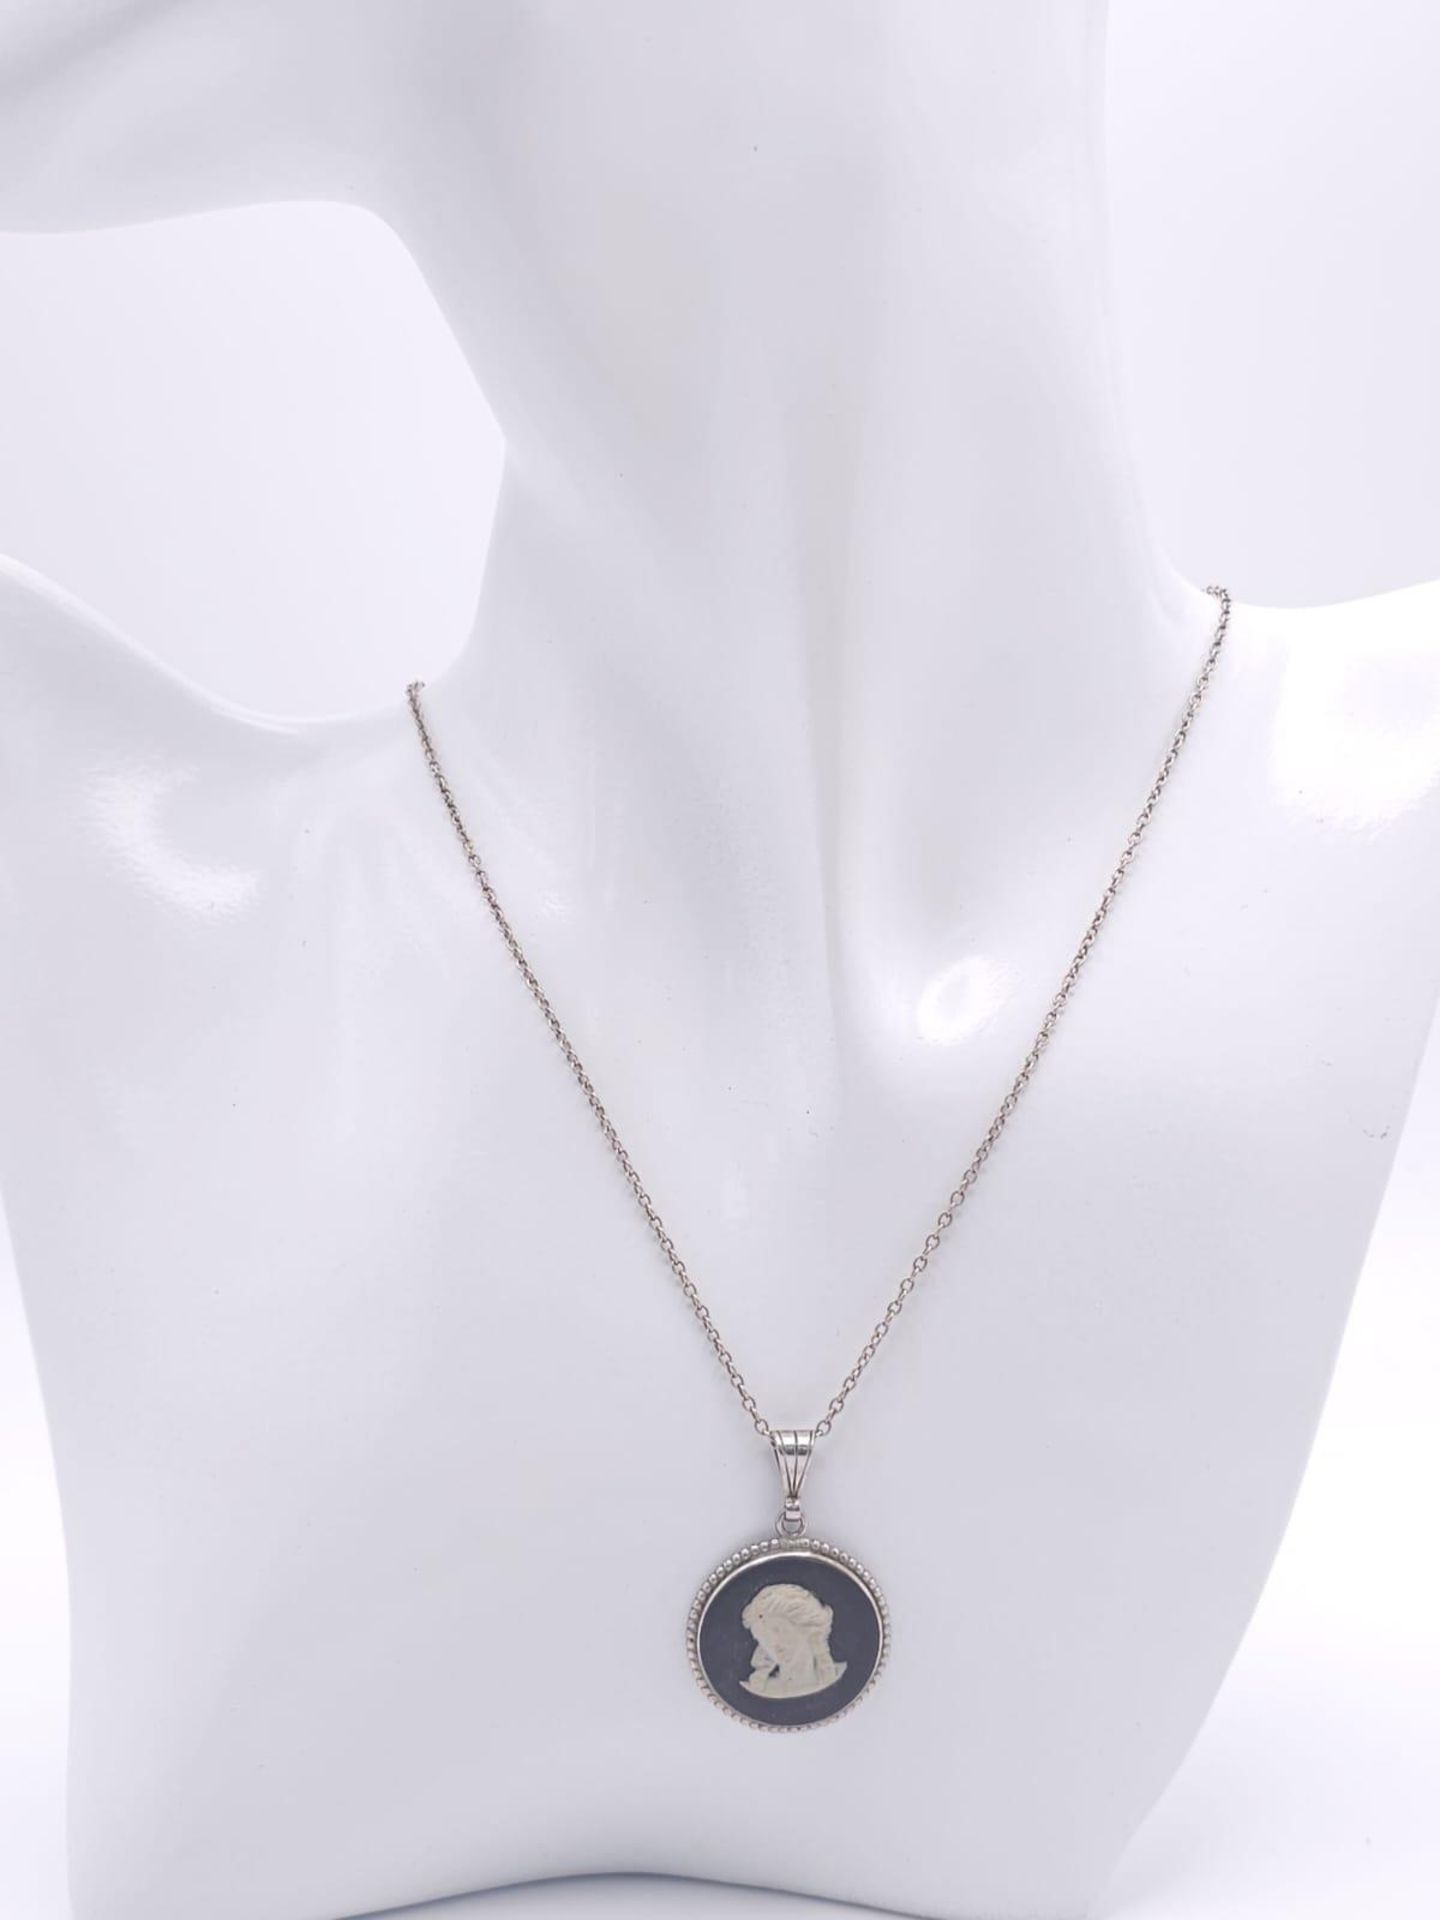 A sterling silver Cameo pendant on silver belcher chain. Total weight 5.3G. Total length 43cm. - Image 12 of 13